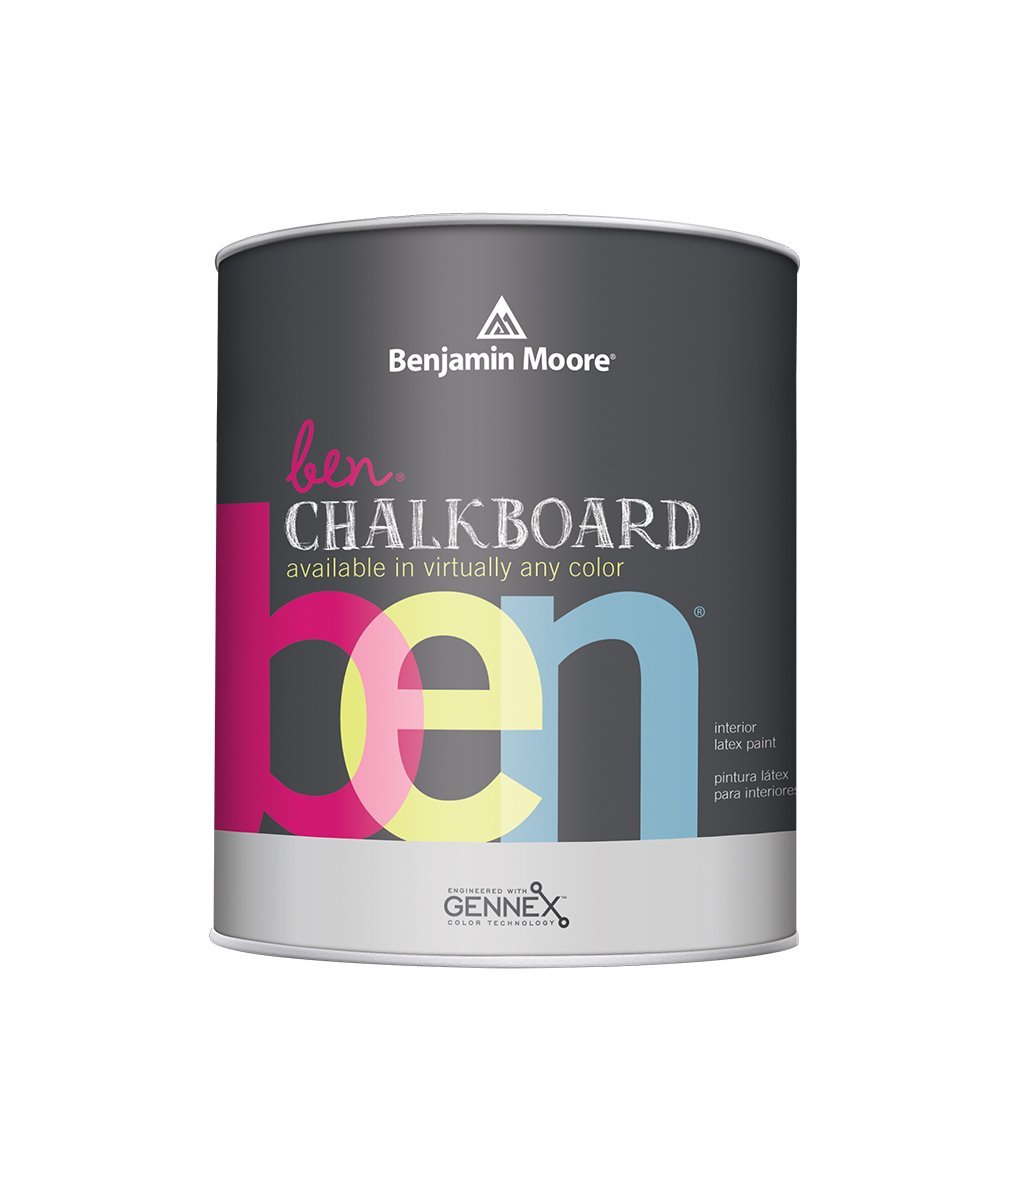 Benjamin Moore chalkboard paint available in Quart size at JC Licht.